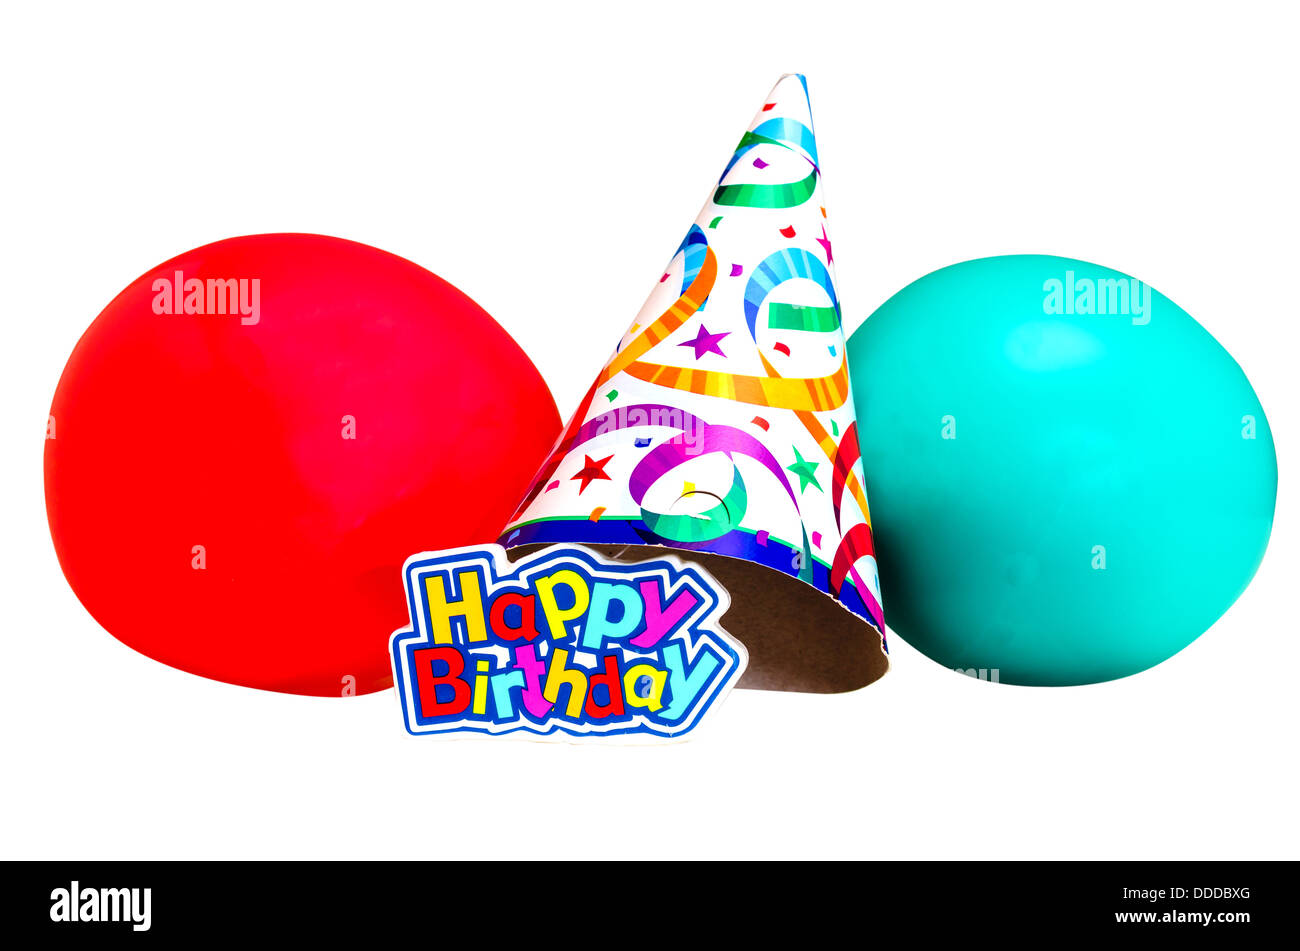 Birthday party isolated on white background with clipping path. Happy birthday candle, balloons, and hat. Stock Photo